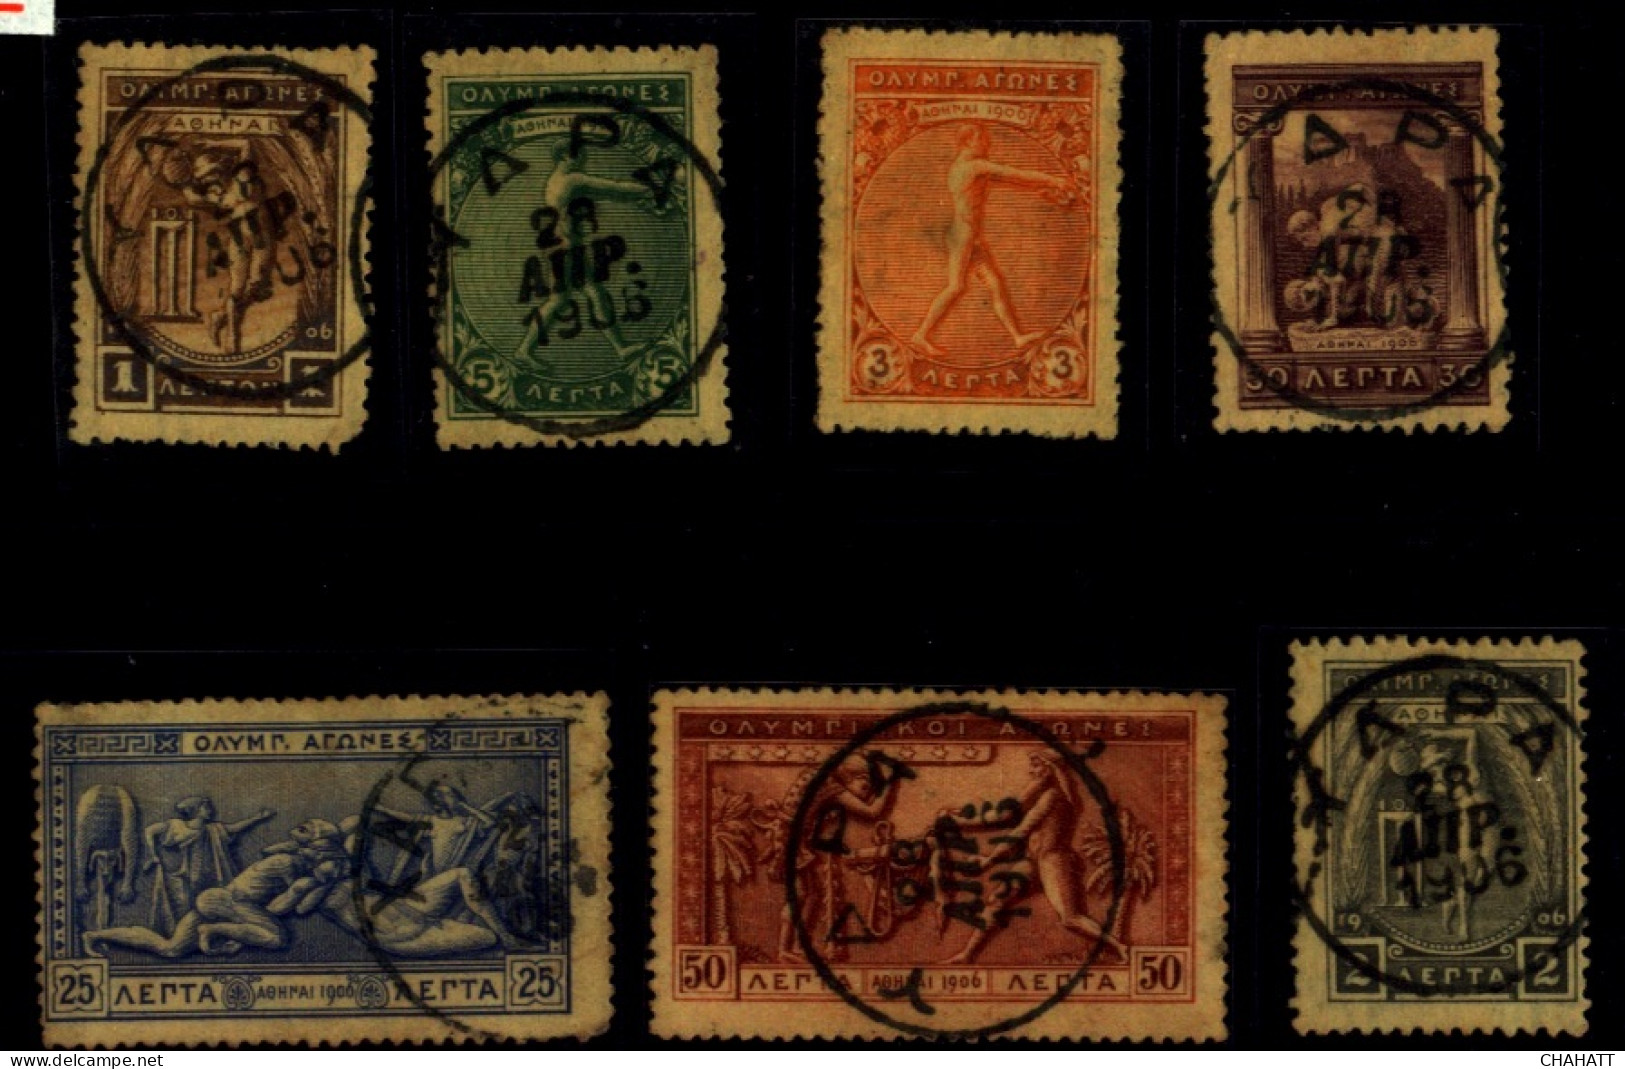 OLYMPICS-1896-ATHENS- GREECE- LOT OF 11 FINE USED -A5-104